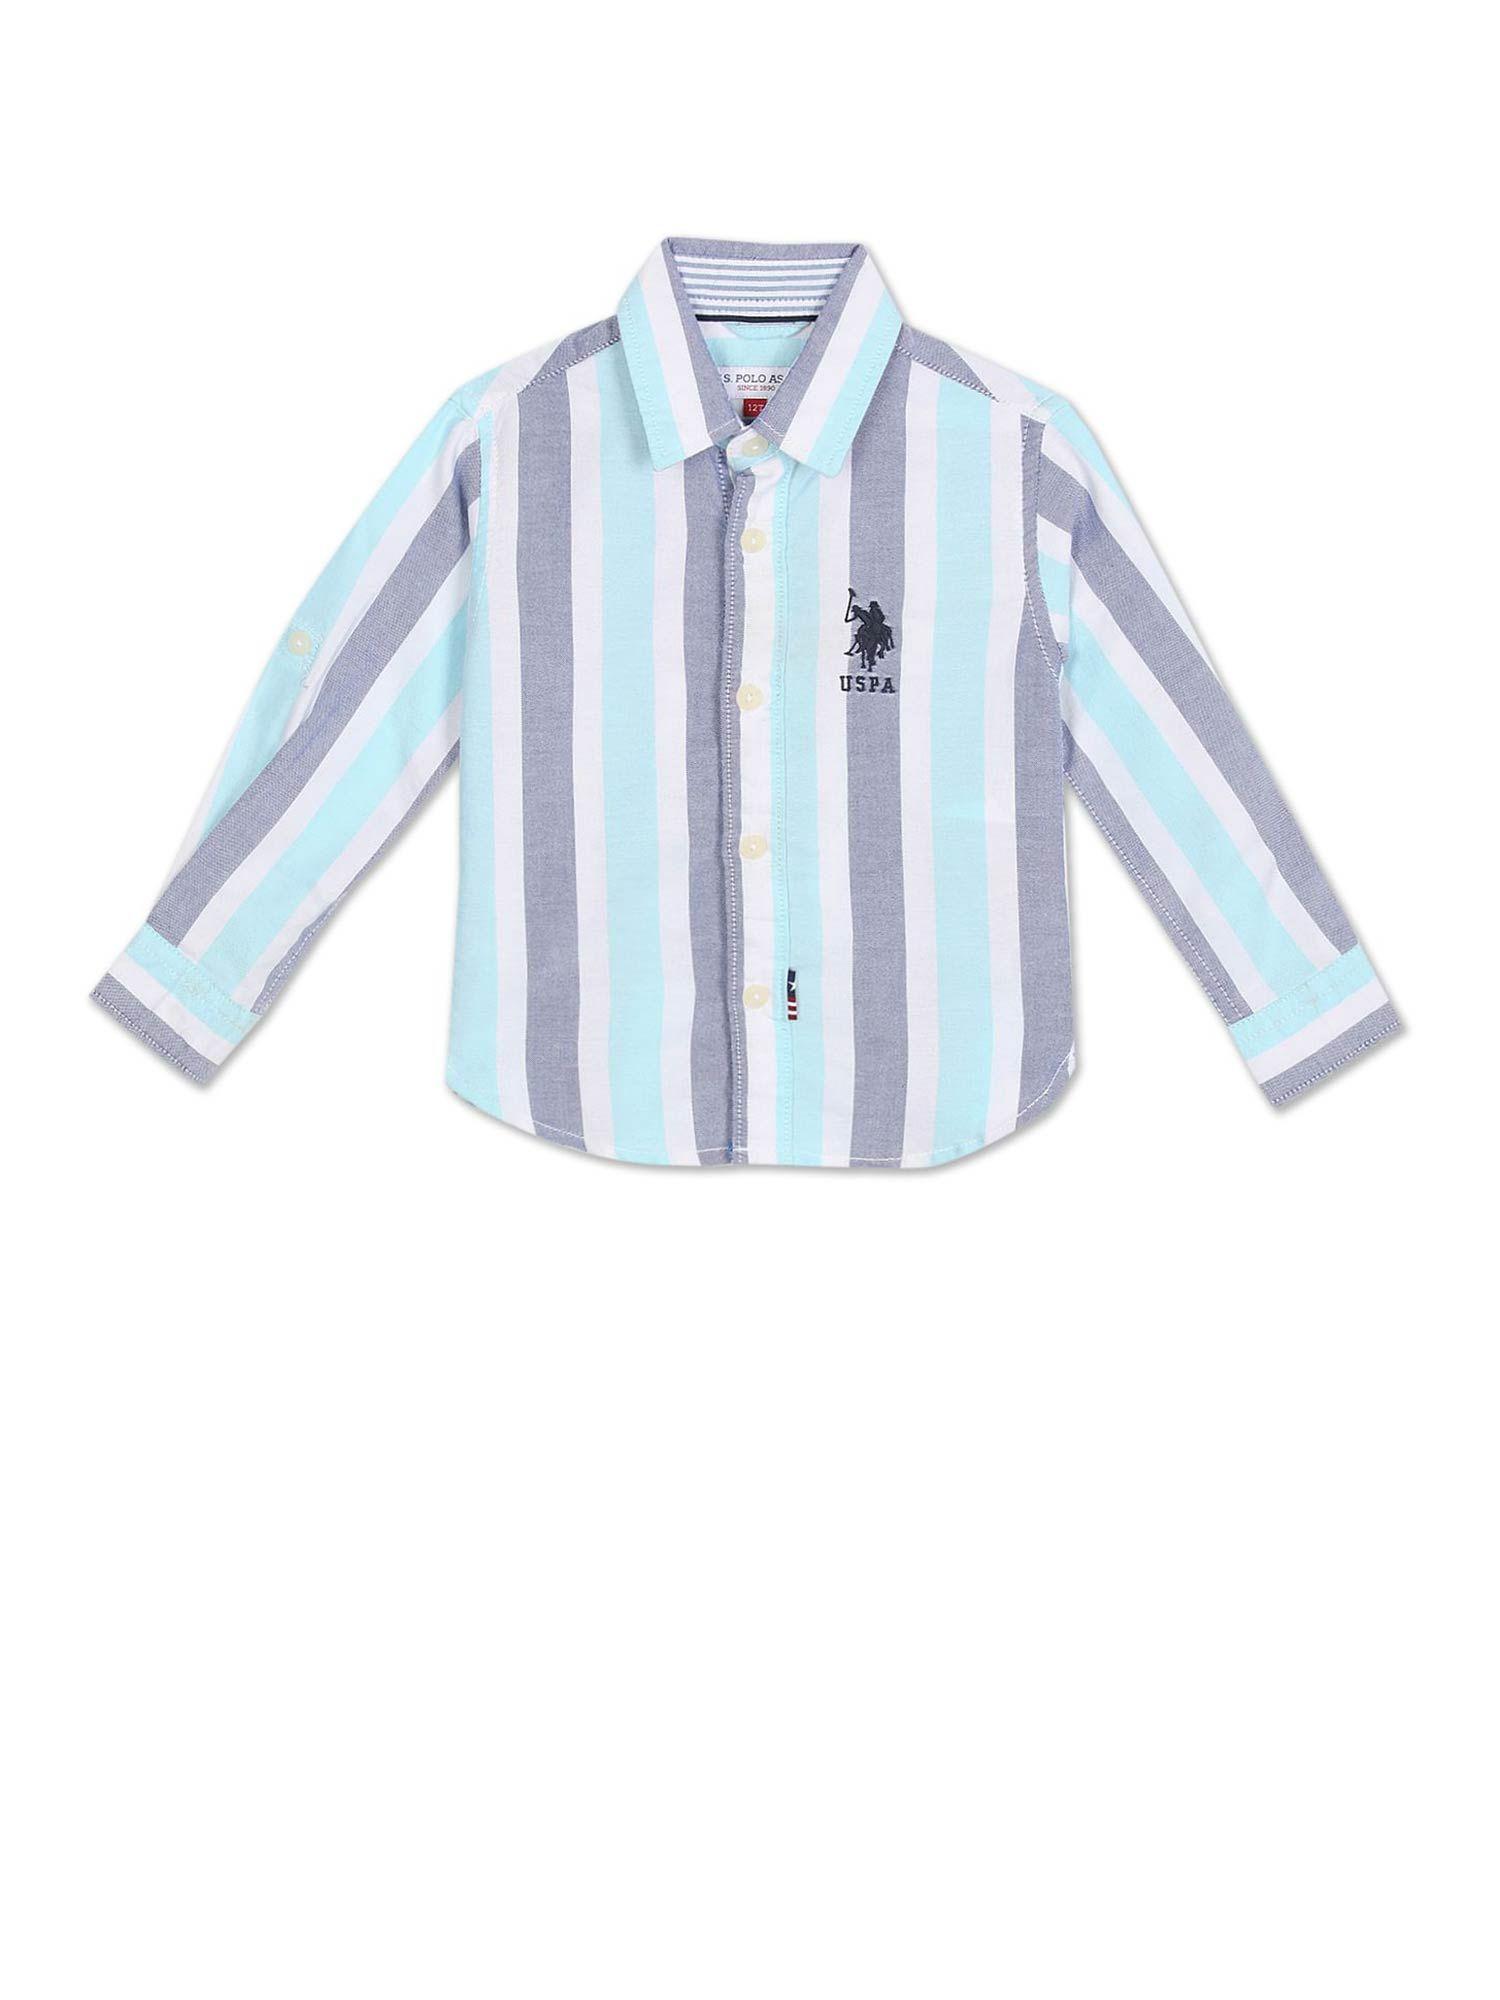 Boys Blue and White Spread Collar Striped Shirt